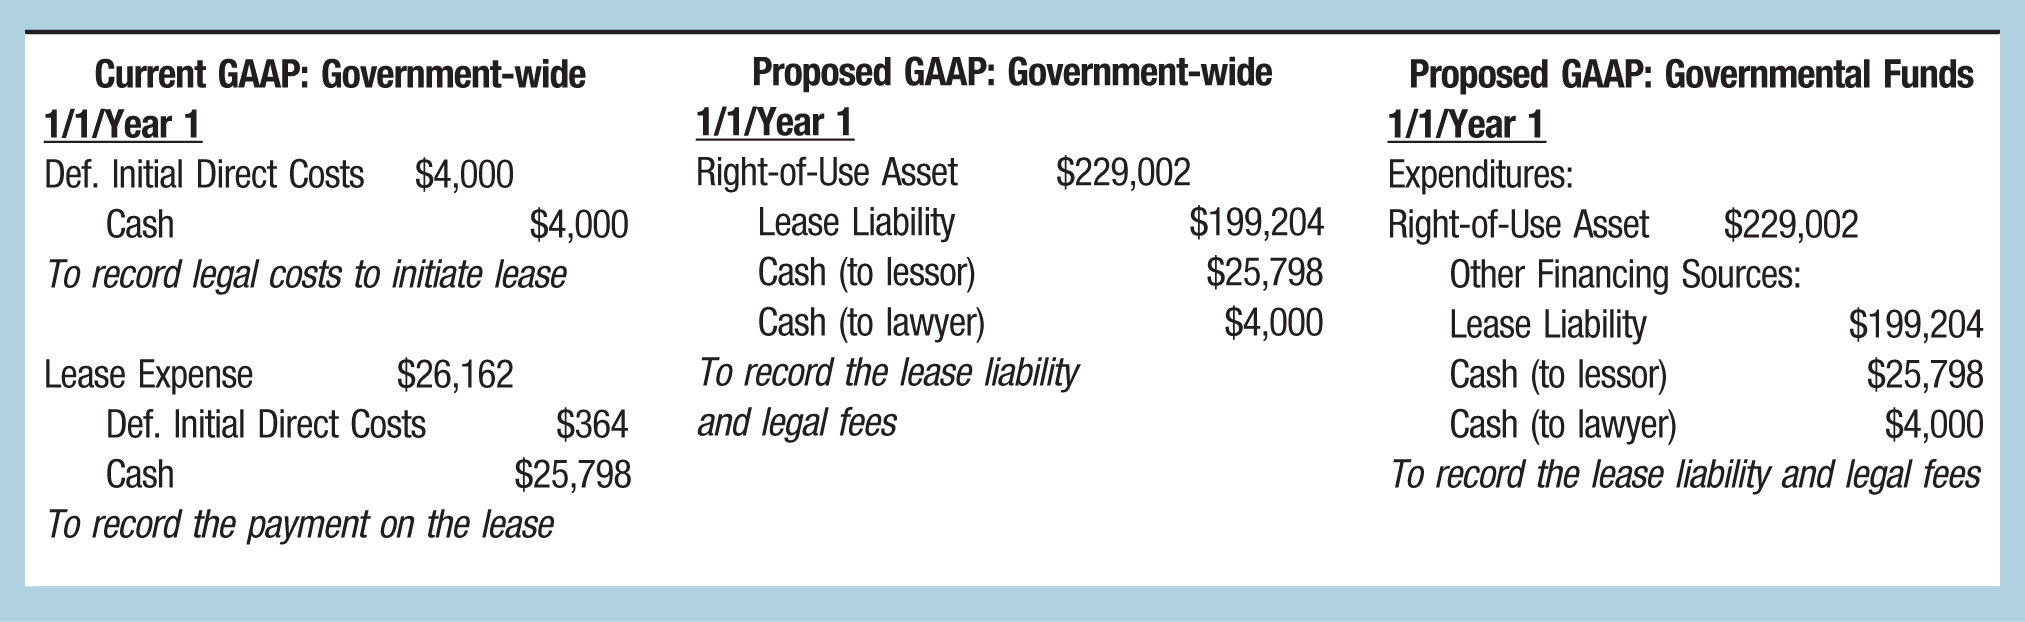 Current GAAP: Government-wide; Proposed GAAP: Government-wide; Proposed GAAP: Governmental Funds 1/1/Year 1; 1/1/Year 1; 1/1/Year 1 Def. Initial Direct Costs; $4,000; Right-of-Use Asset; $229,002; Expenditures: Cash; $4,000; Lease Liability; $199,204; Right-of-Use Asset; $229,002 To record legal costs to initiate lease; Cash (to lessor); $25,798; Other Financing Sources: Cash (to lawyer); $4,000; Lease Liability; $199,204 Lease Expense; $26,162; To record the lease liability; Cash (to lessor); $25,798 Def. Initial Direct Costs; $364; and legal fees; Cash (to lawyer); $4,000 Cash; $25,798; To record the lease liability and legal fees To record the payment on the lease